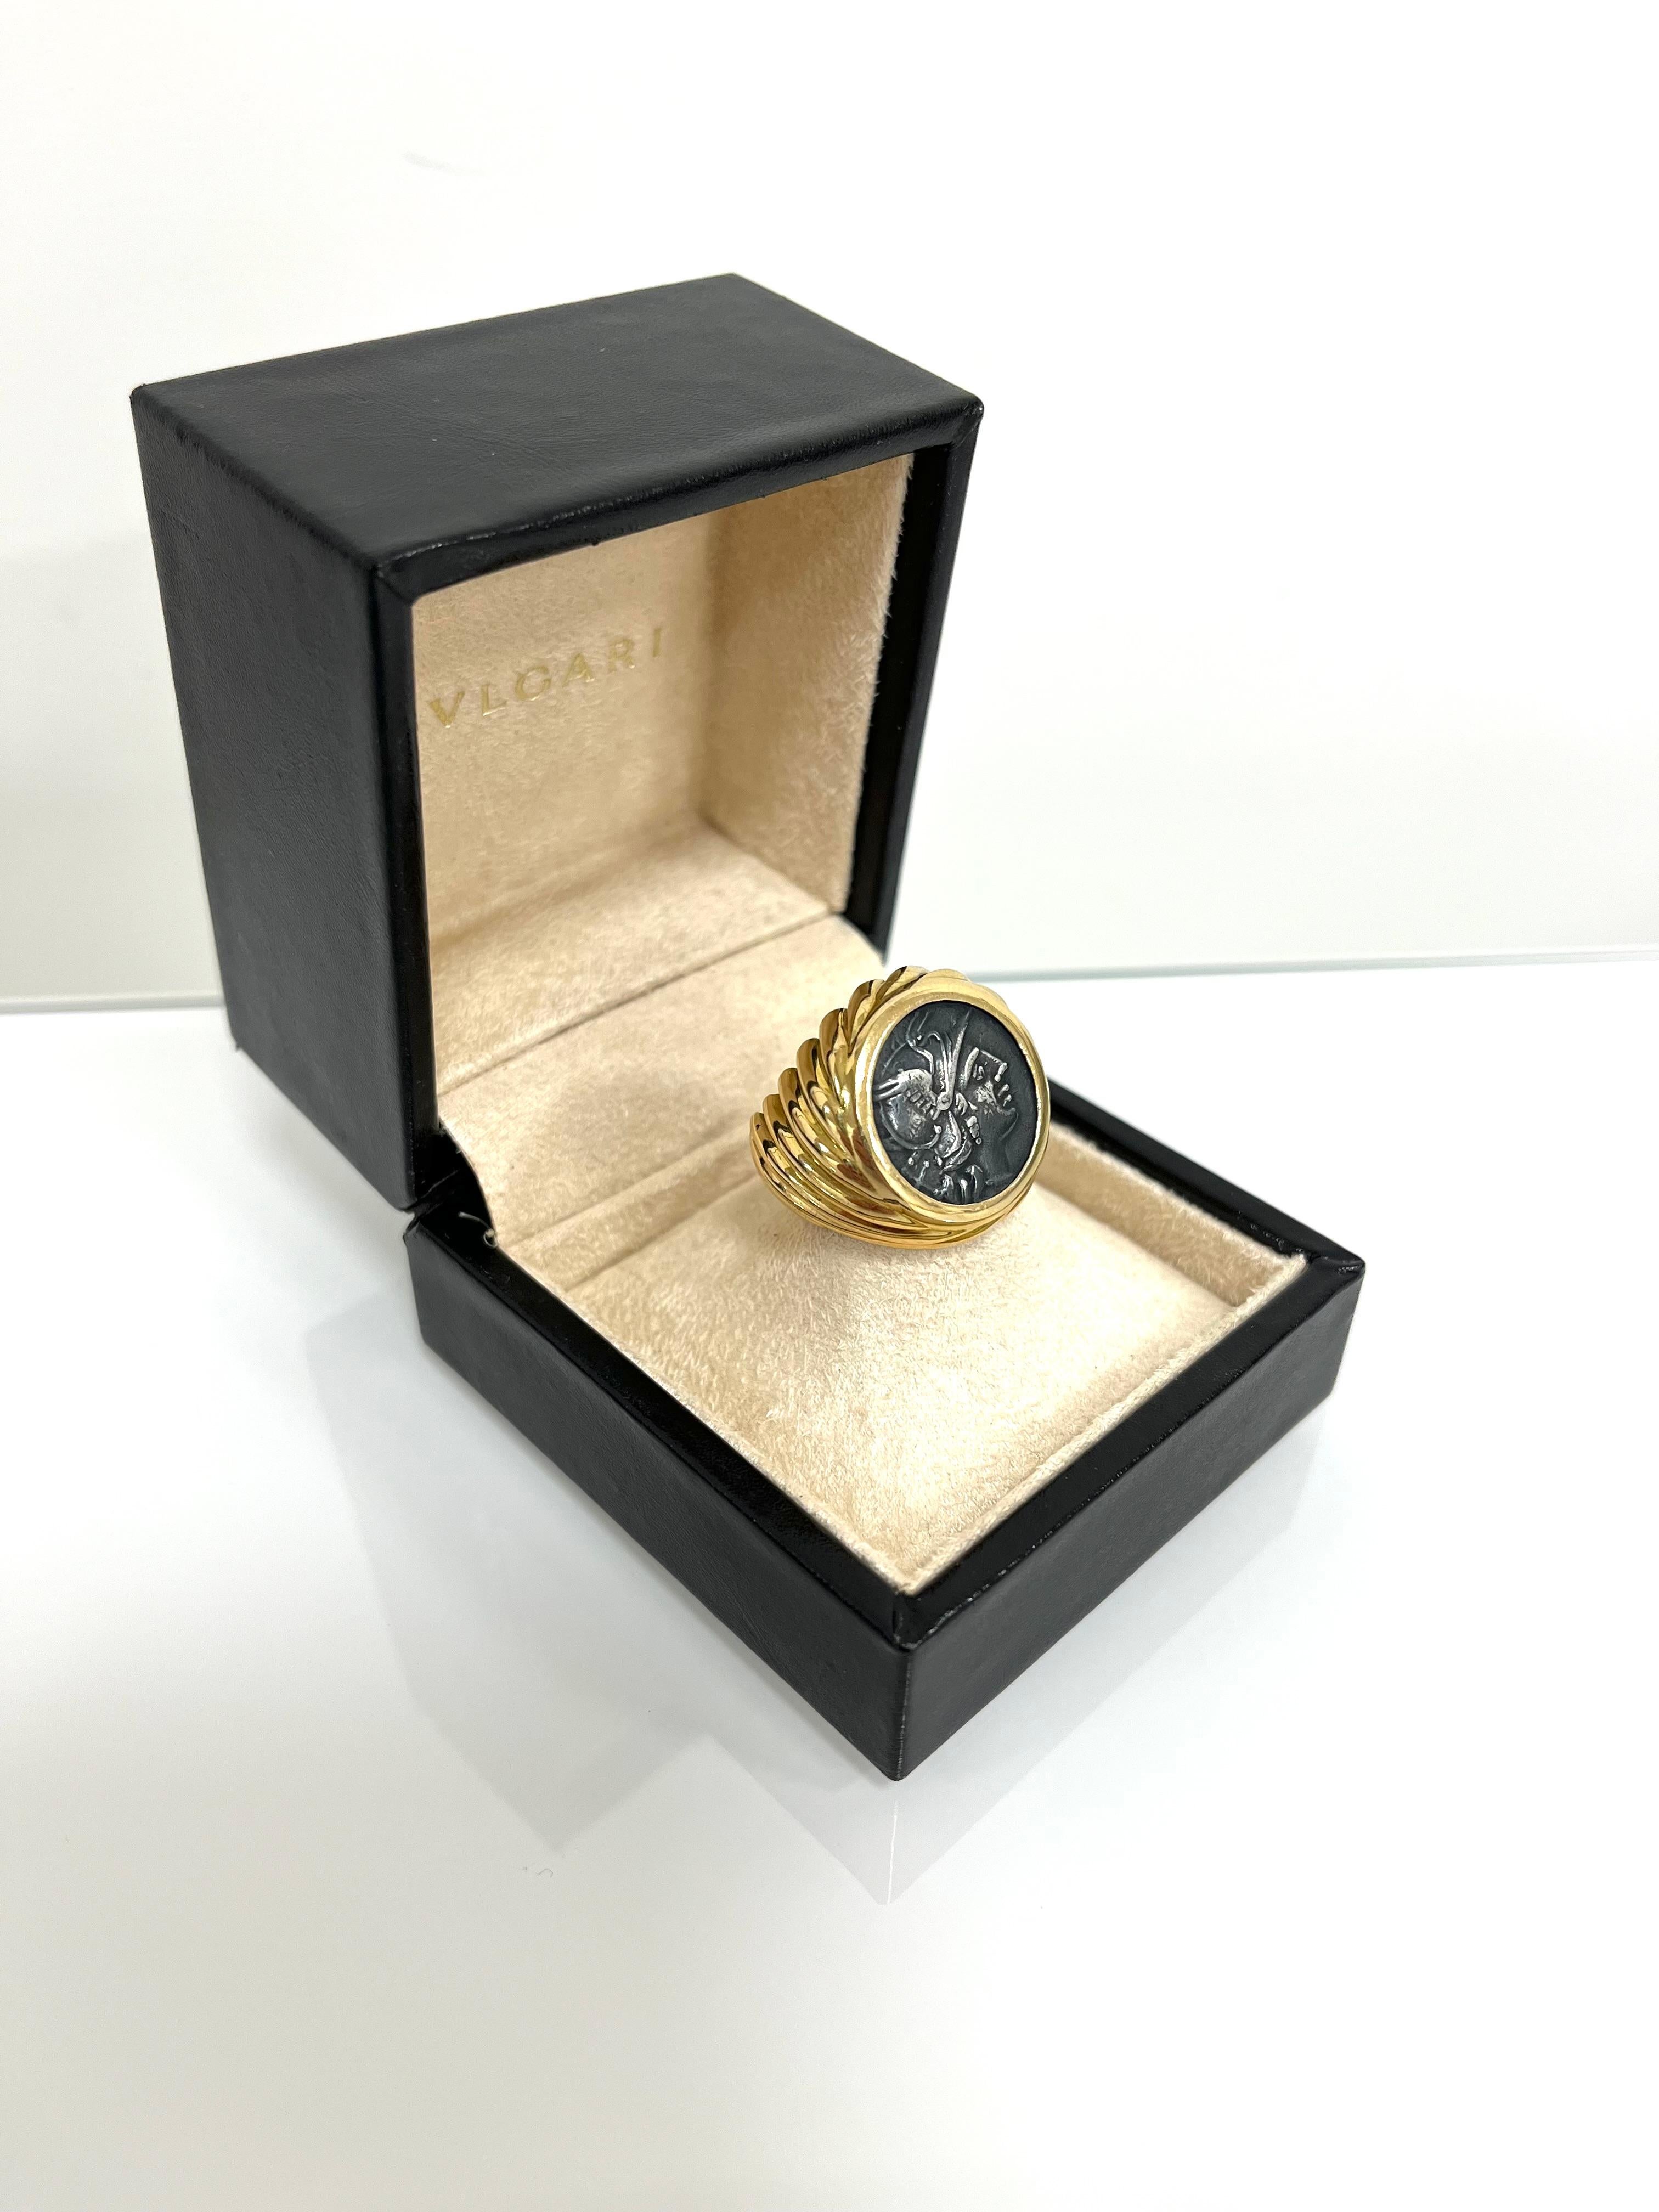 Ring made of 18 kt. yellow gold with engraved antique coin signed Bulgari.
This beautiful vintage piece belongs to the Bulgari Coins collection.
The ring features an ancient coin dating back to the Roman Empire, depicting:
Front: Claudius Pulcher,